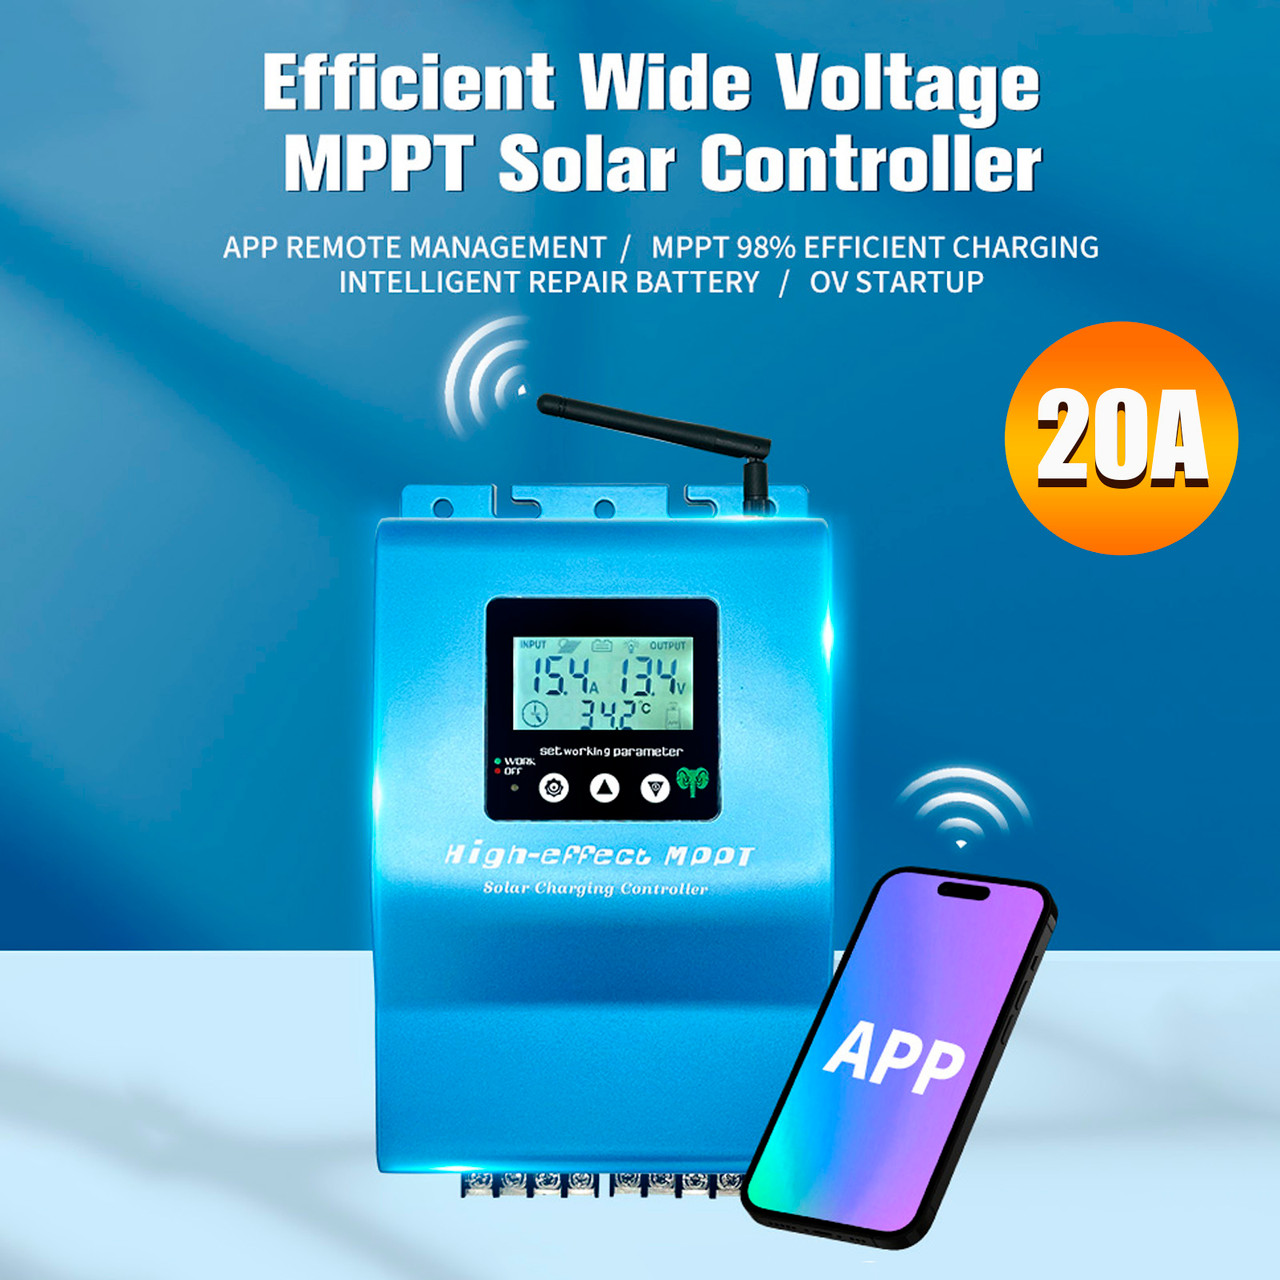 20A MPPT Solar Controller Smart APP to Remotely Manage Photovoltaic Controller